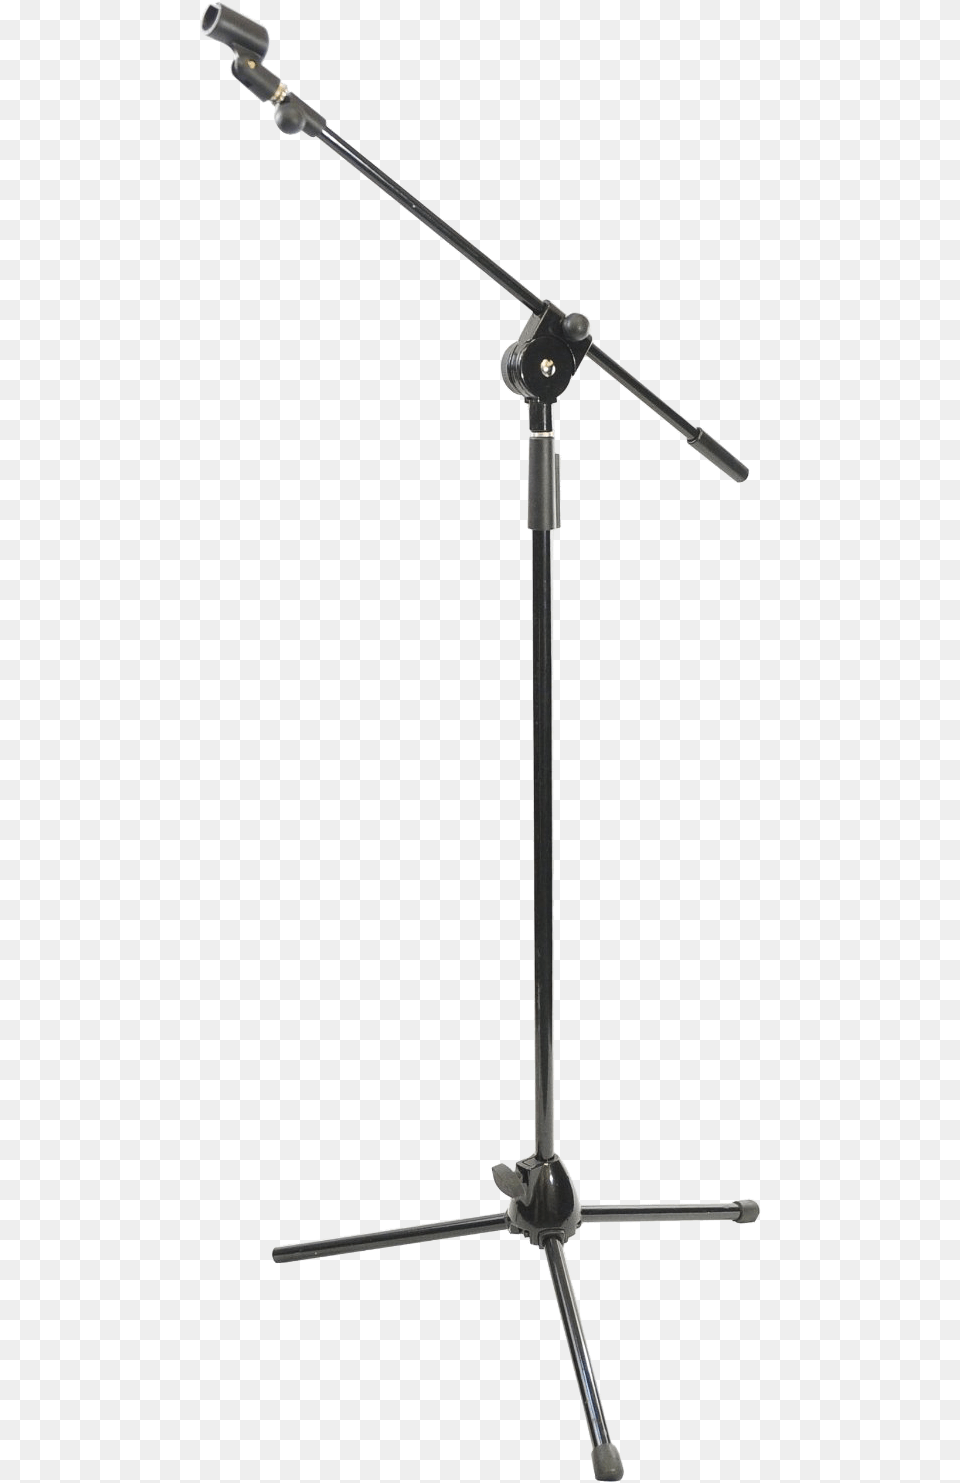 Microphone Stands Audio Shock Mount Recording Studio Microphone Stand, Electrical Device, Tripod, Furniture, Sword Png